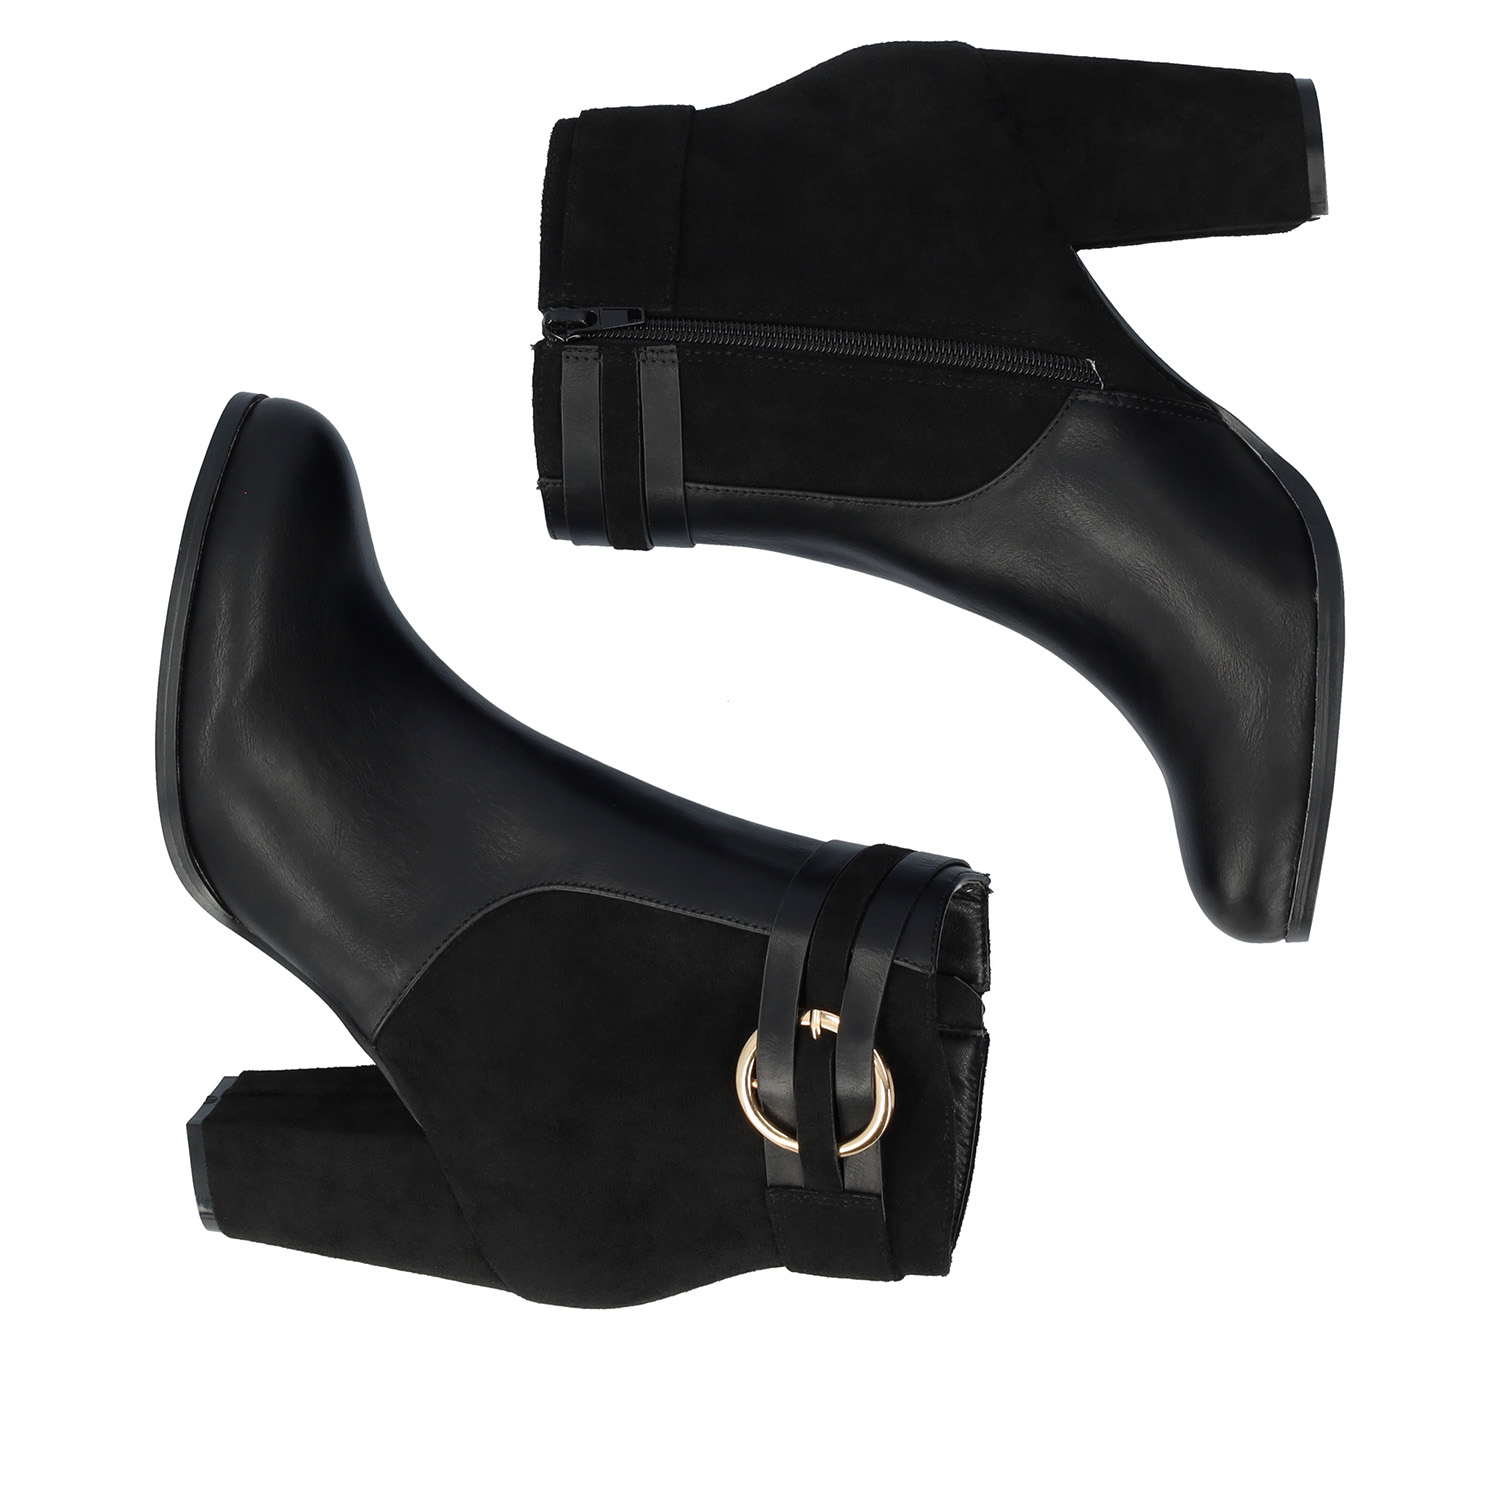 High heeled combined black colour bootie. 